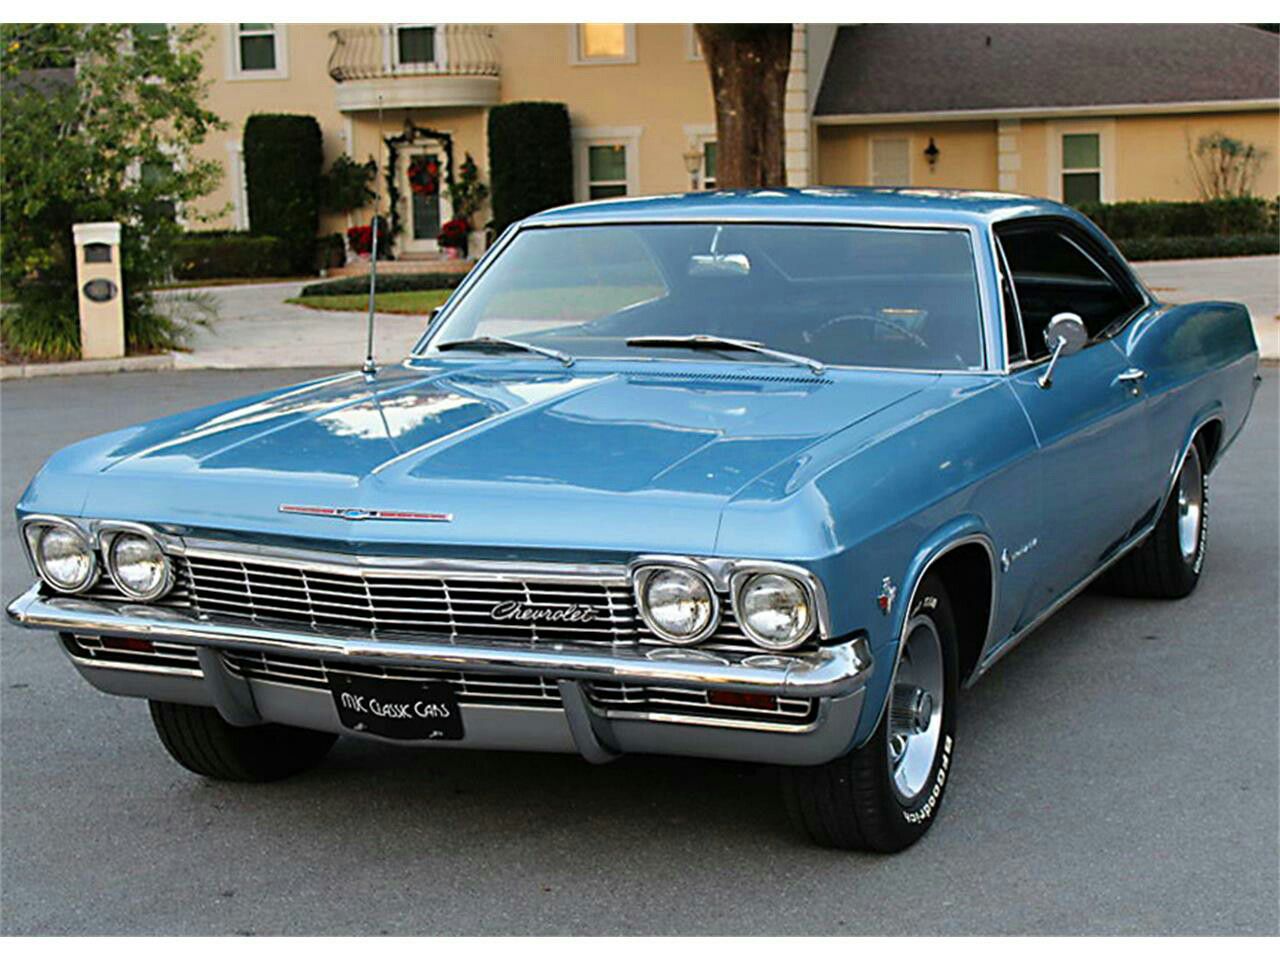 1965 Chevy Impala Super Sport and 1972 Chevy Chevelle